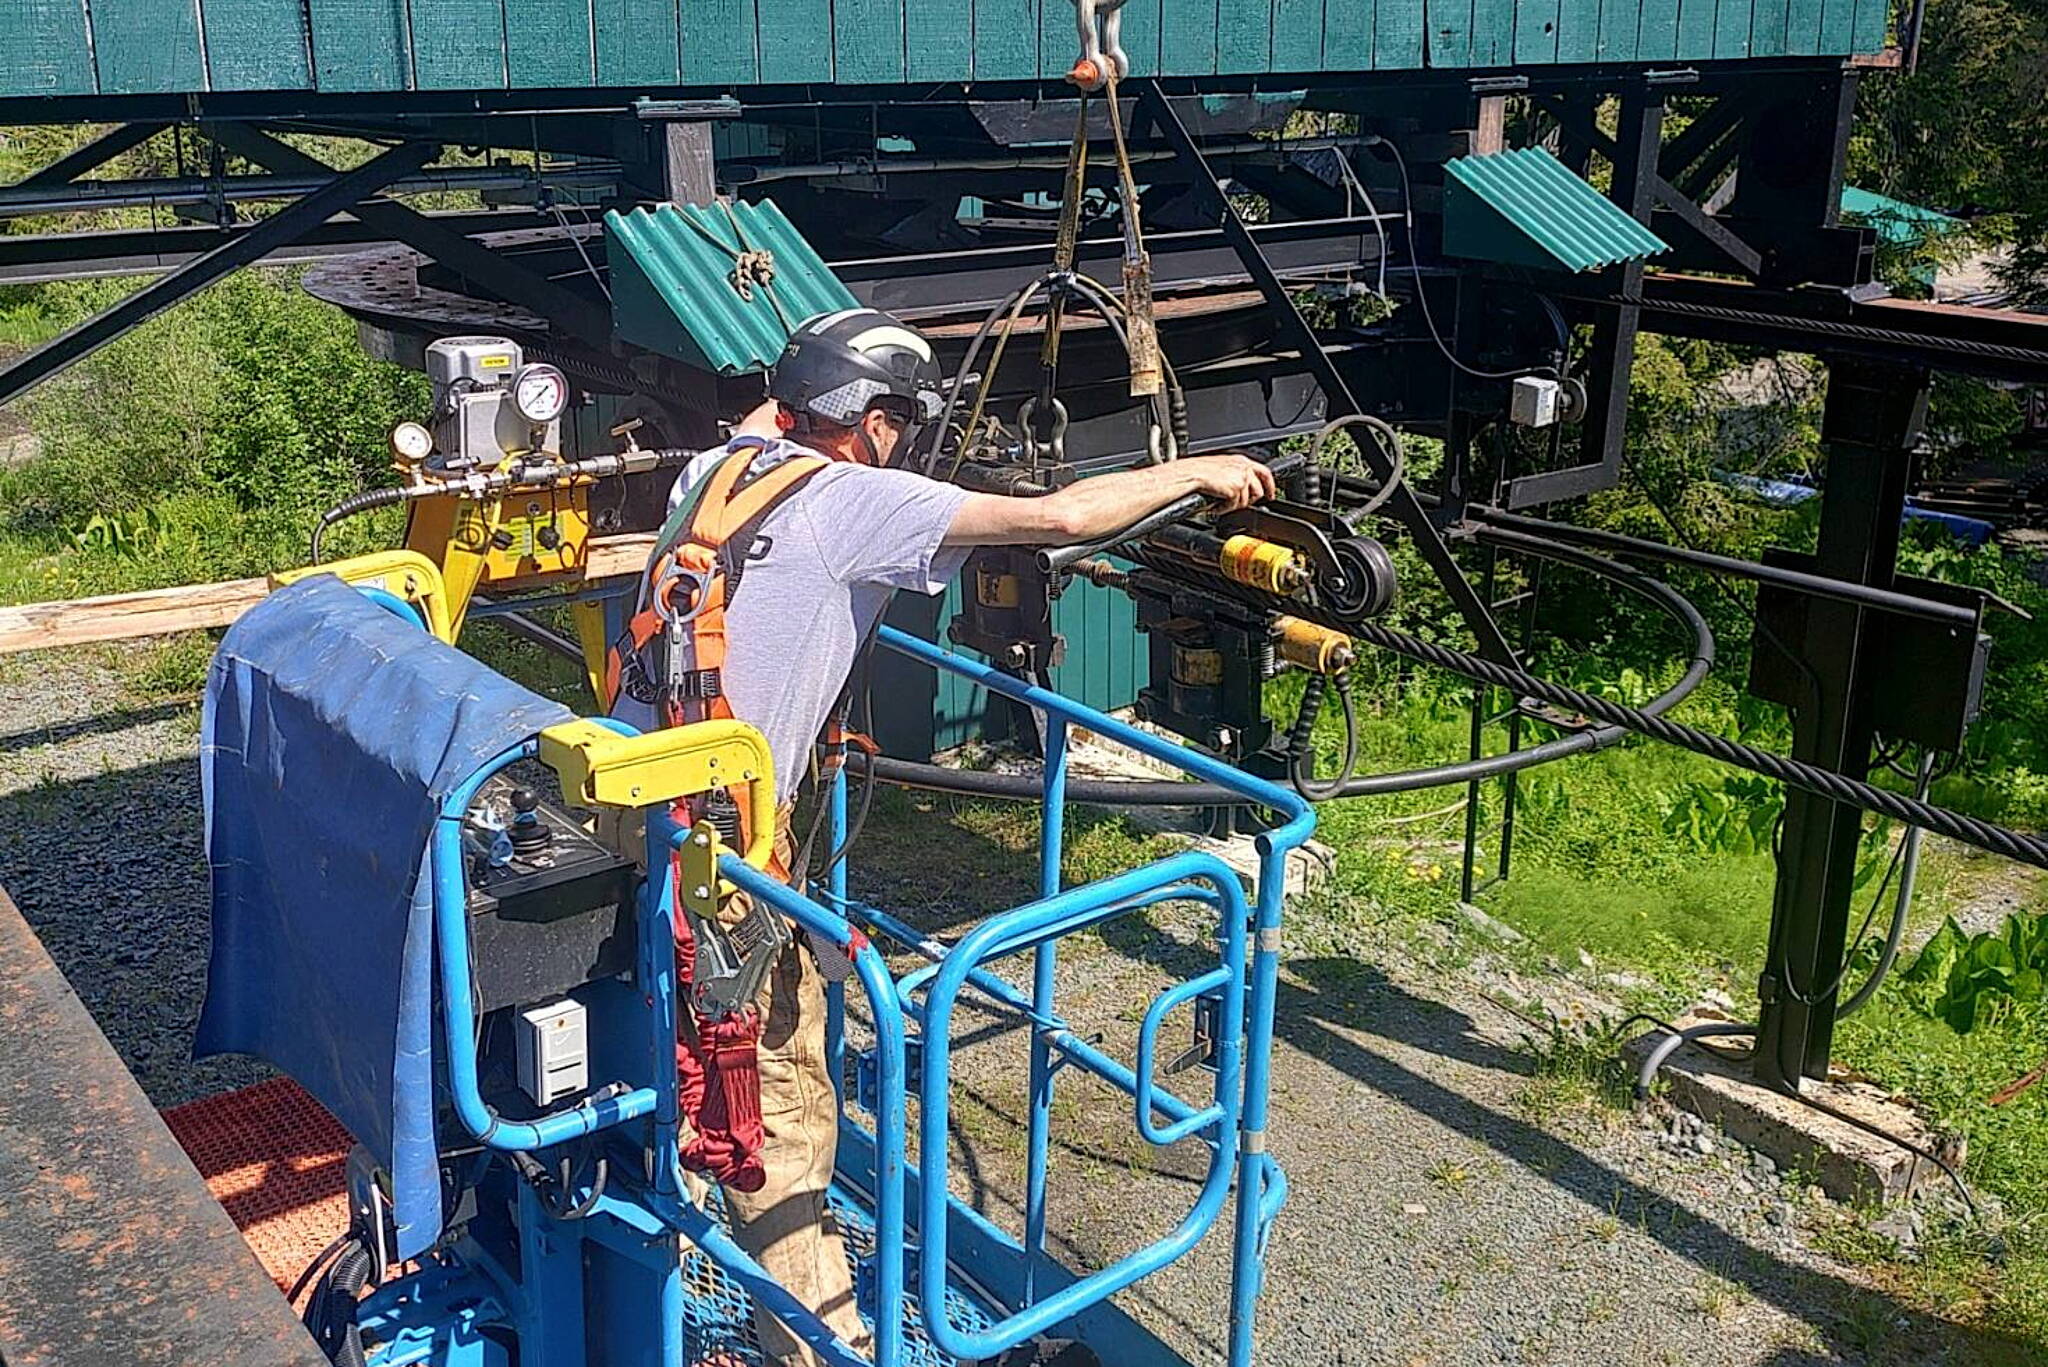 An employee performs maintenance work on a chairlift at Eaglecrest Ski Area in late June. (Eaglecrest Ski Area photo)